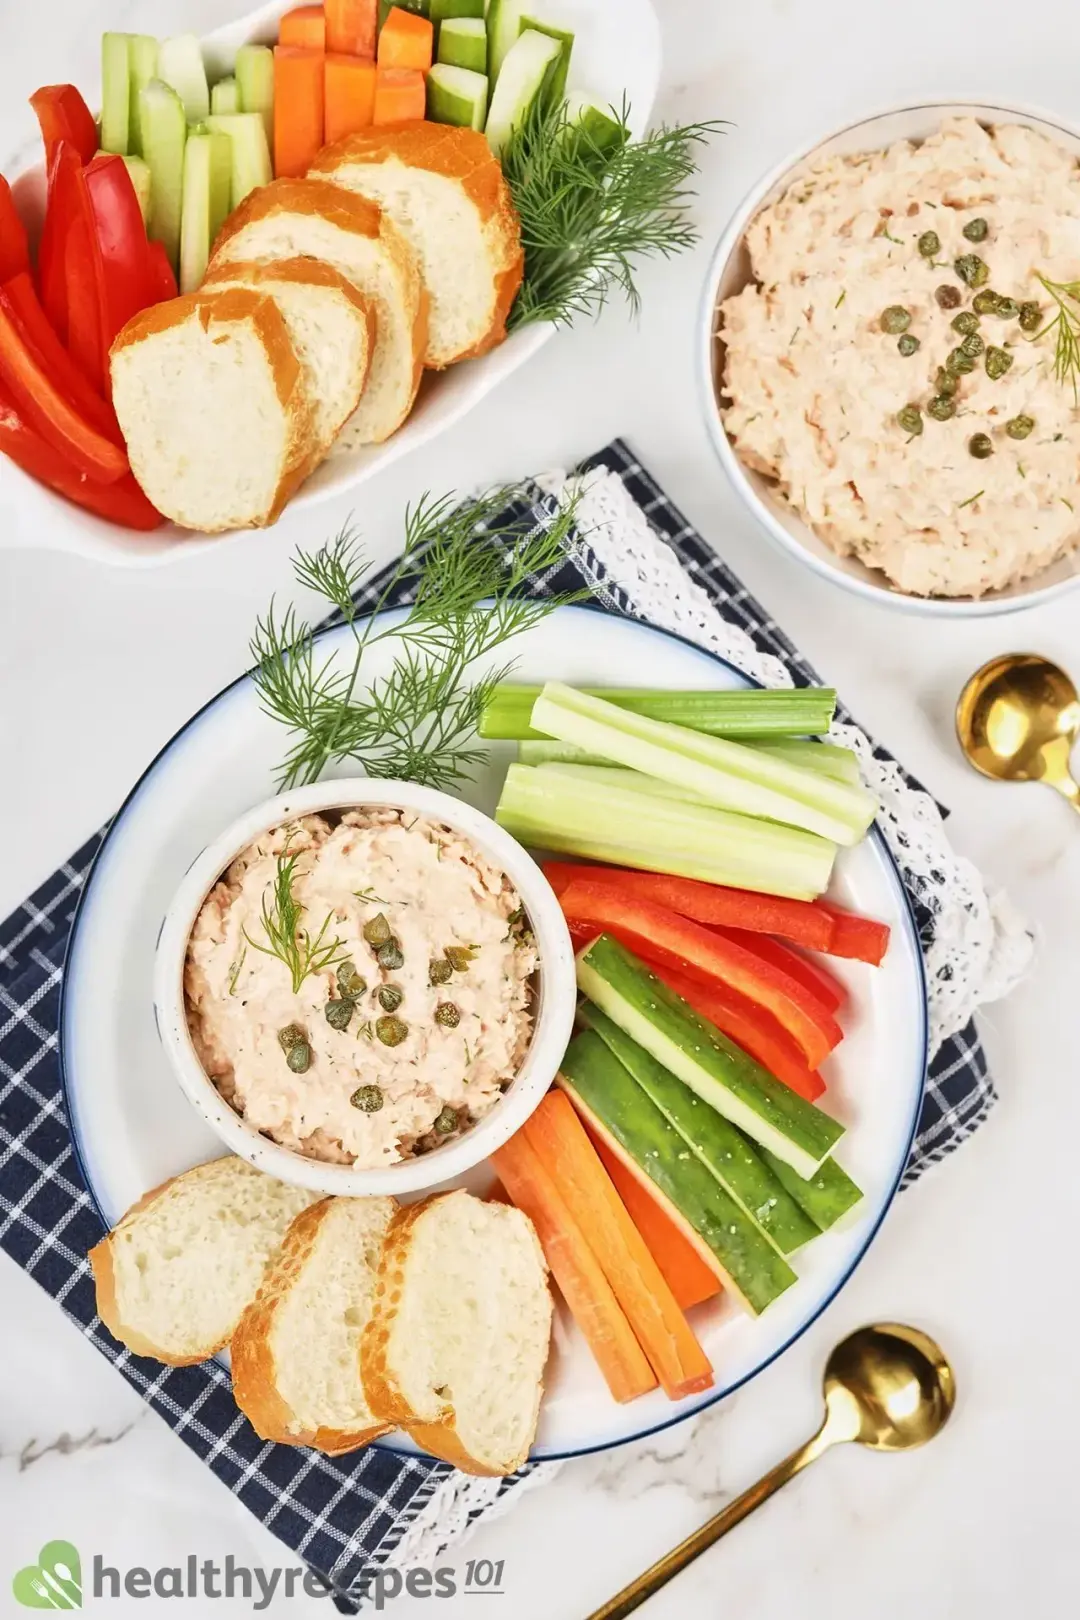 Storing and Freezing Leftover Salmon Dip